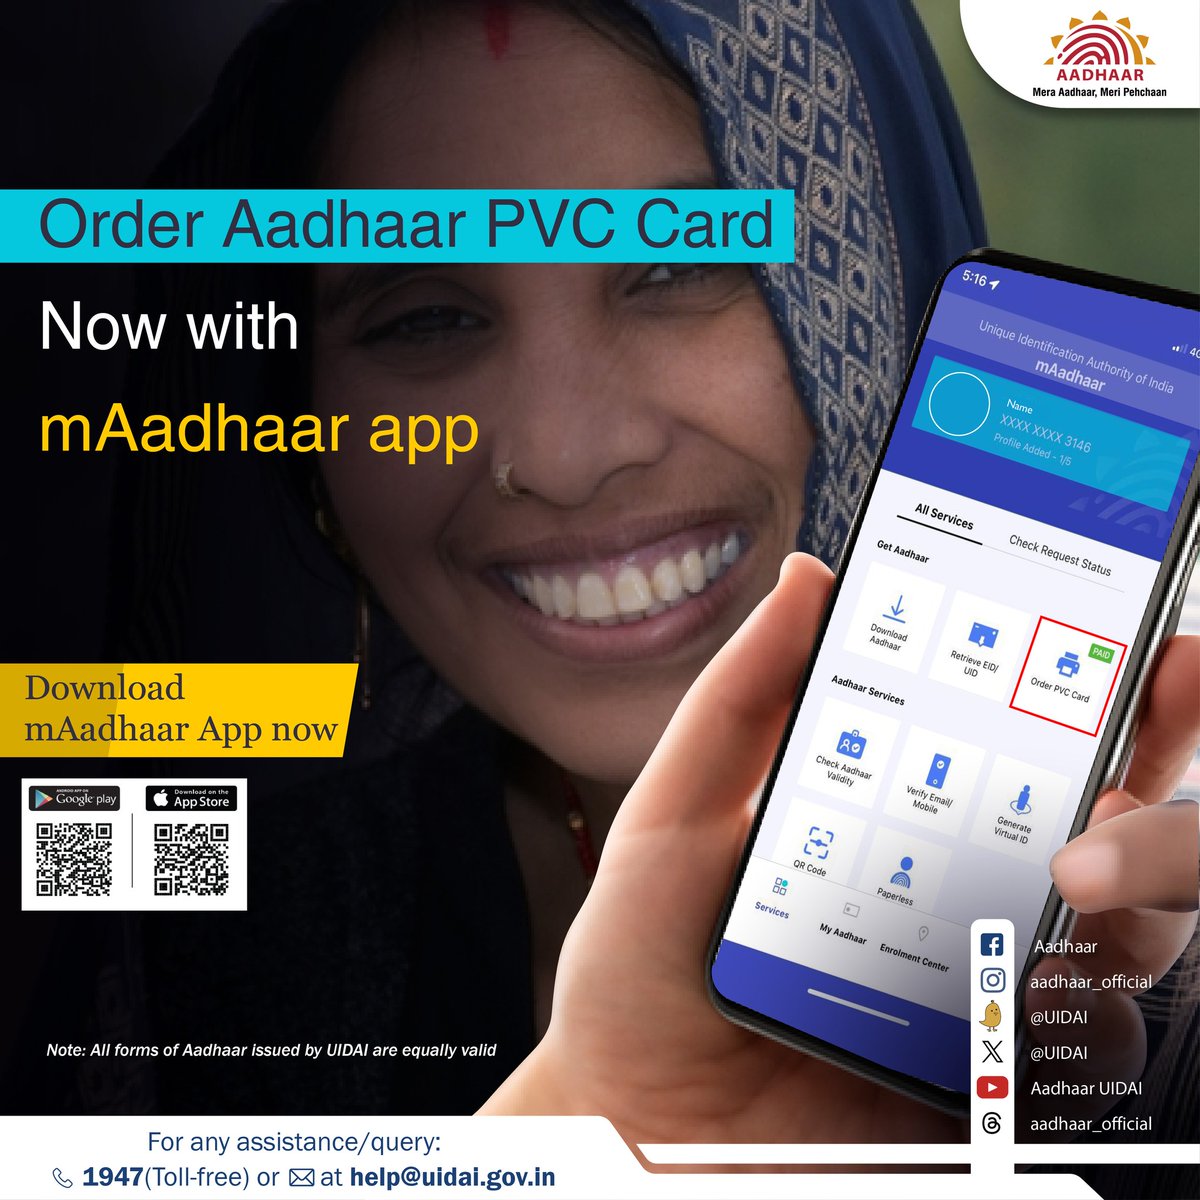 #AadhaarPVCcard The facility of ordering #Aadhaar PVC Card is only available online and it costs ₹50, which includes all taxes and delivery charges (via Speed Post). You may order your Aadhaar PVC Card using the #mAadhaar App.